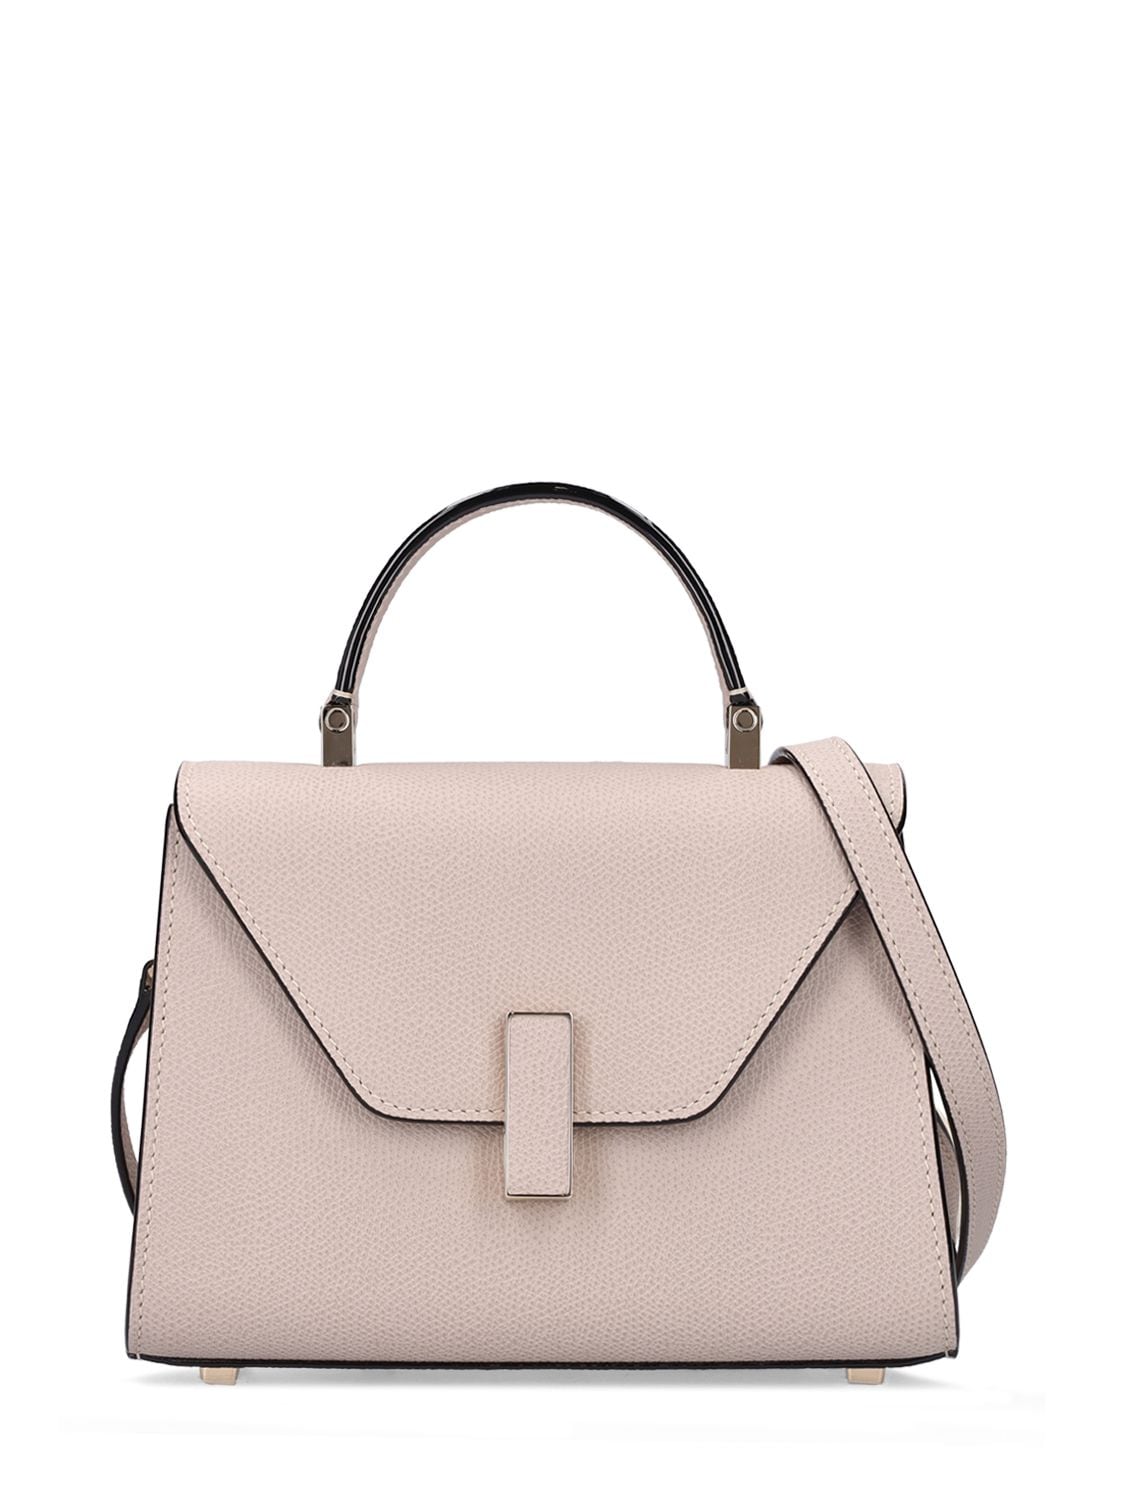 Valextra Micro Iside Grain Leather Top Handle Bag In Nude